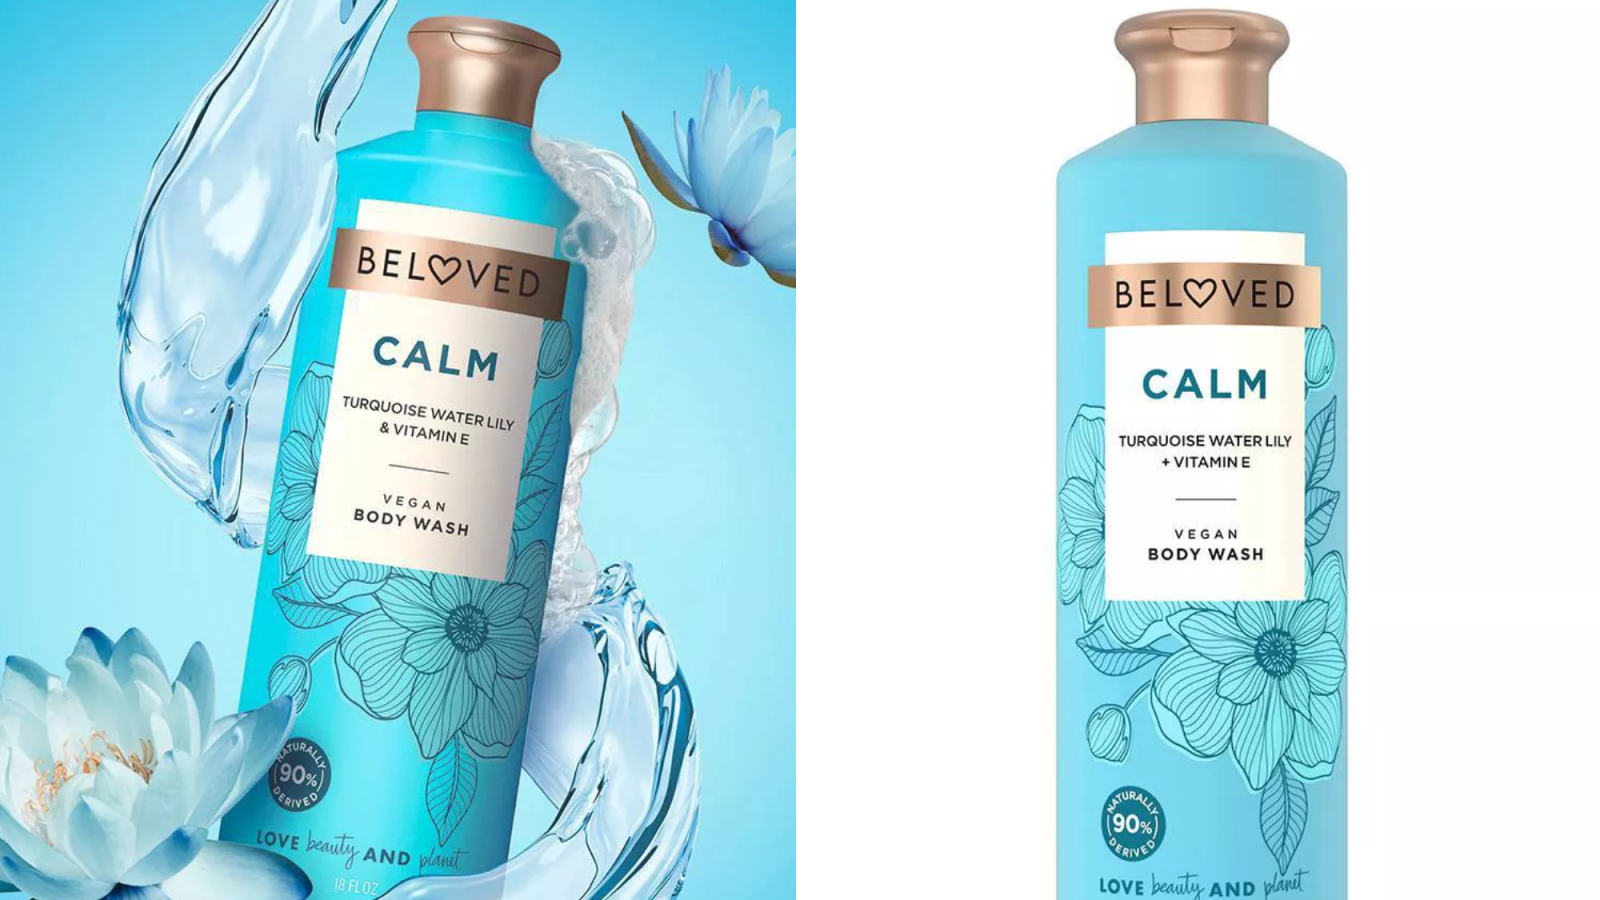 Beloved Calm Vegan Body Wash with Turquoise Water Lily & Vitamin E